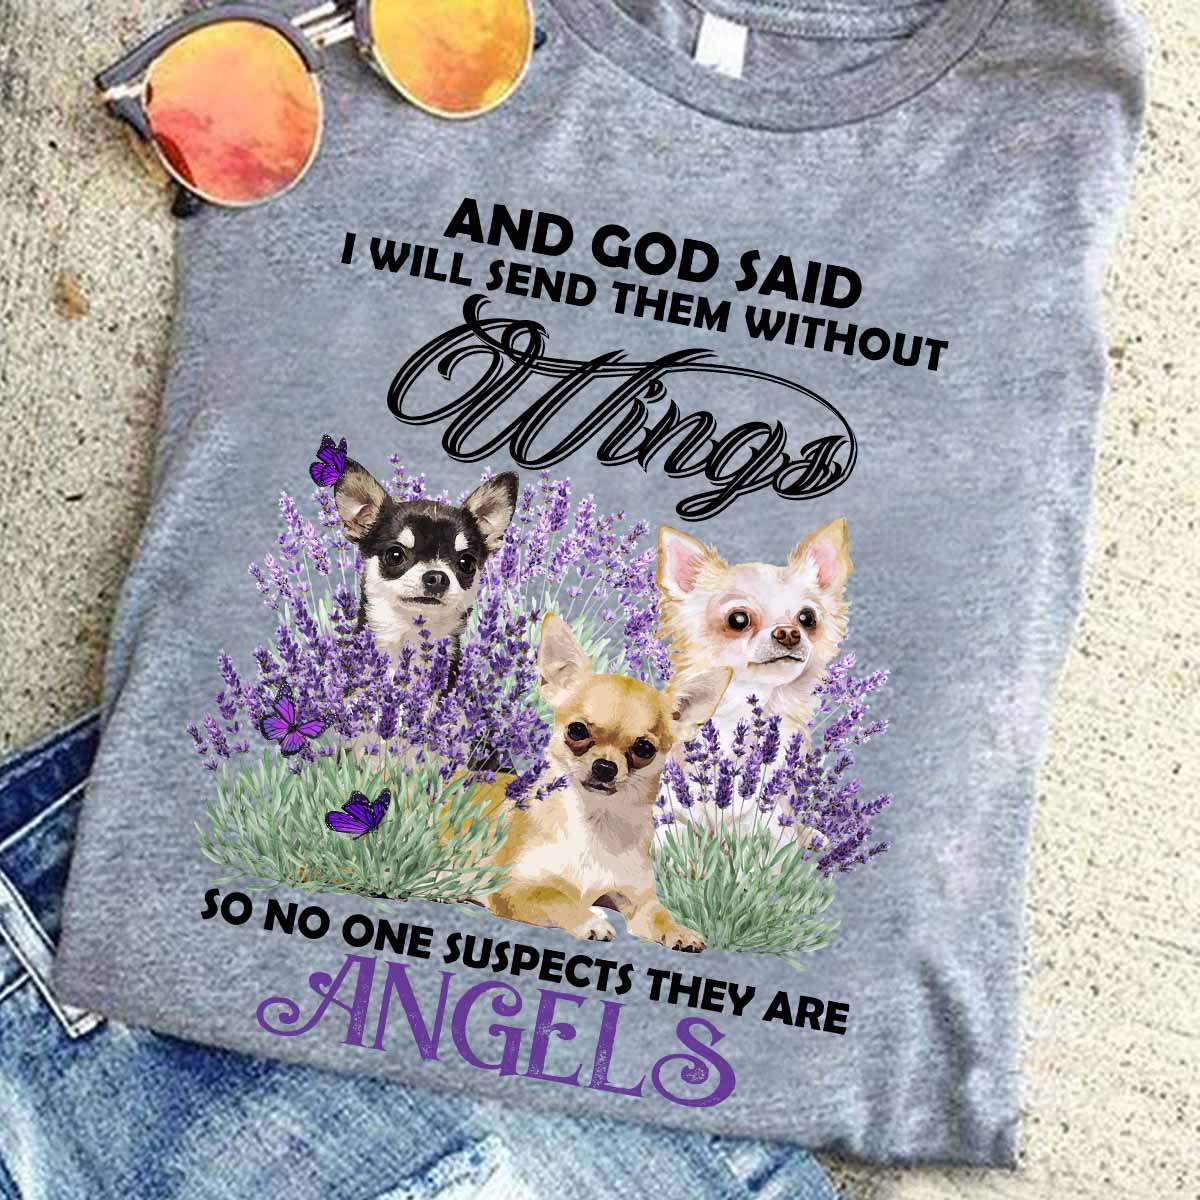 Chihuahua Dog - And god said i will send them without wings so no one suspects they are angels